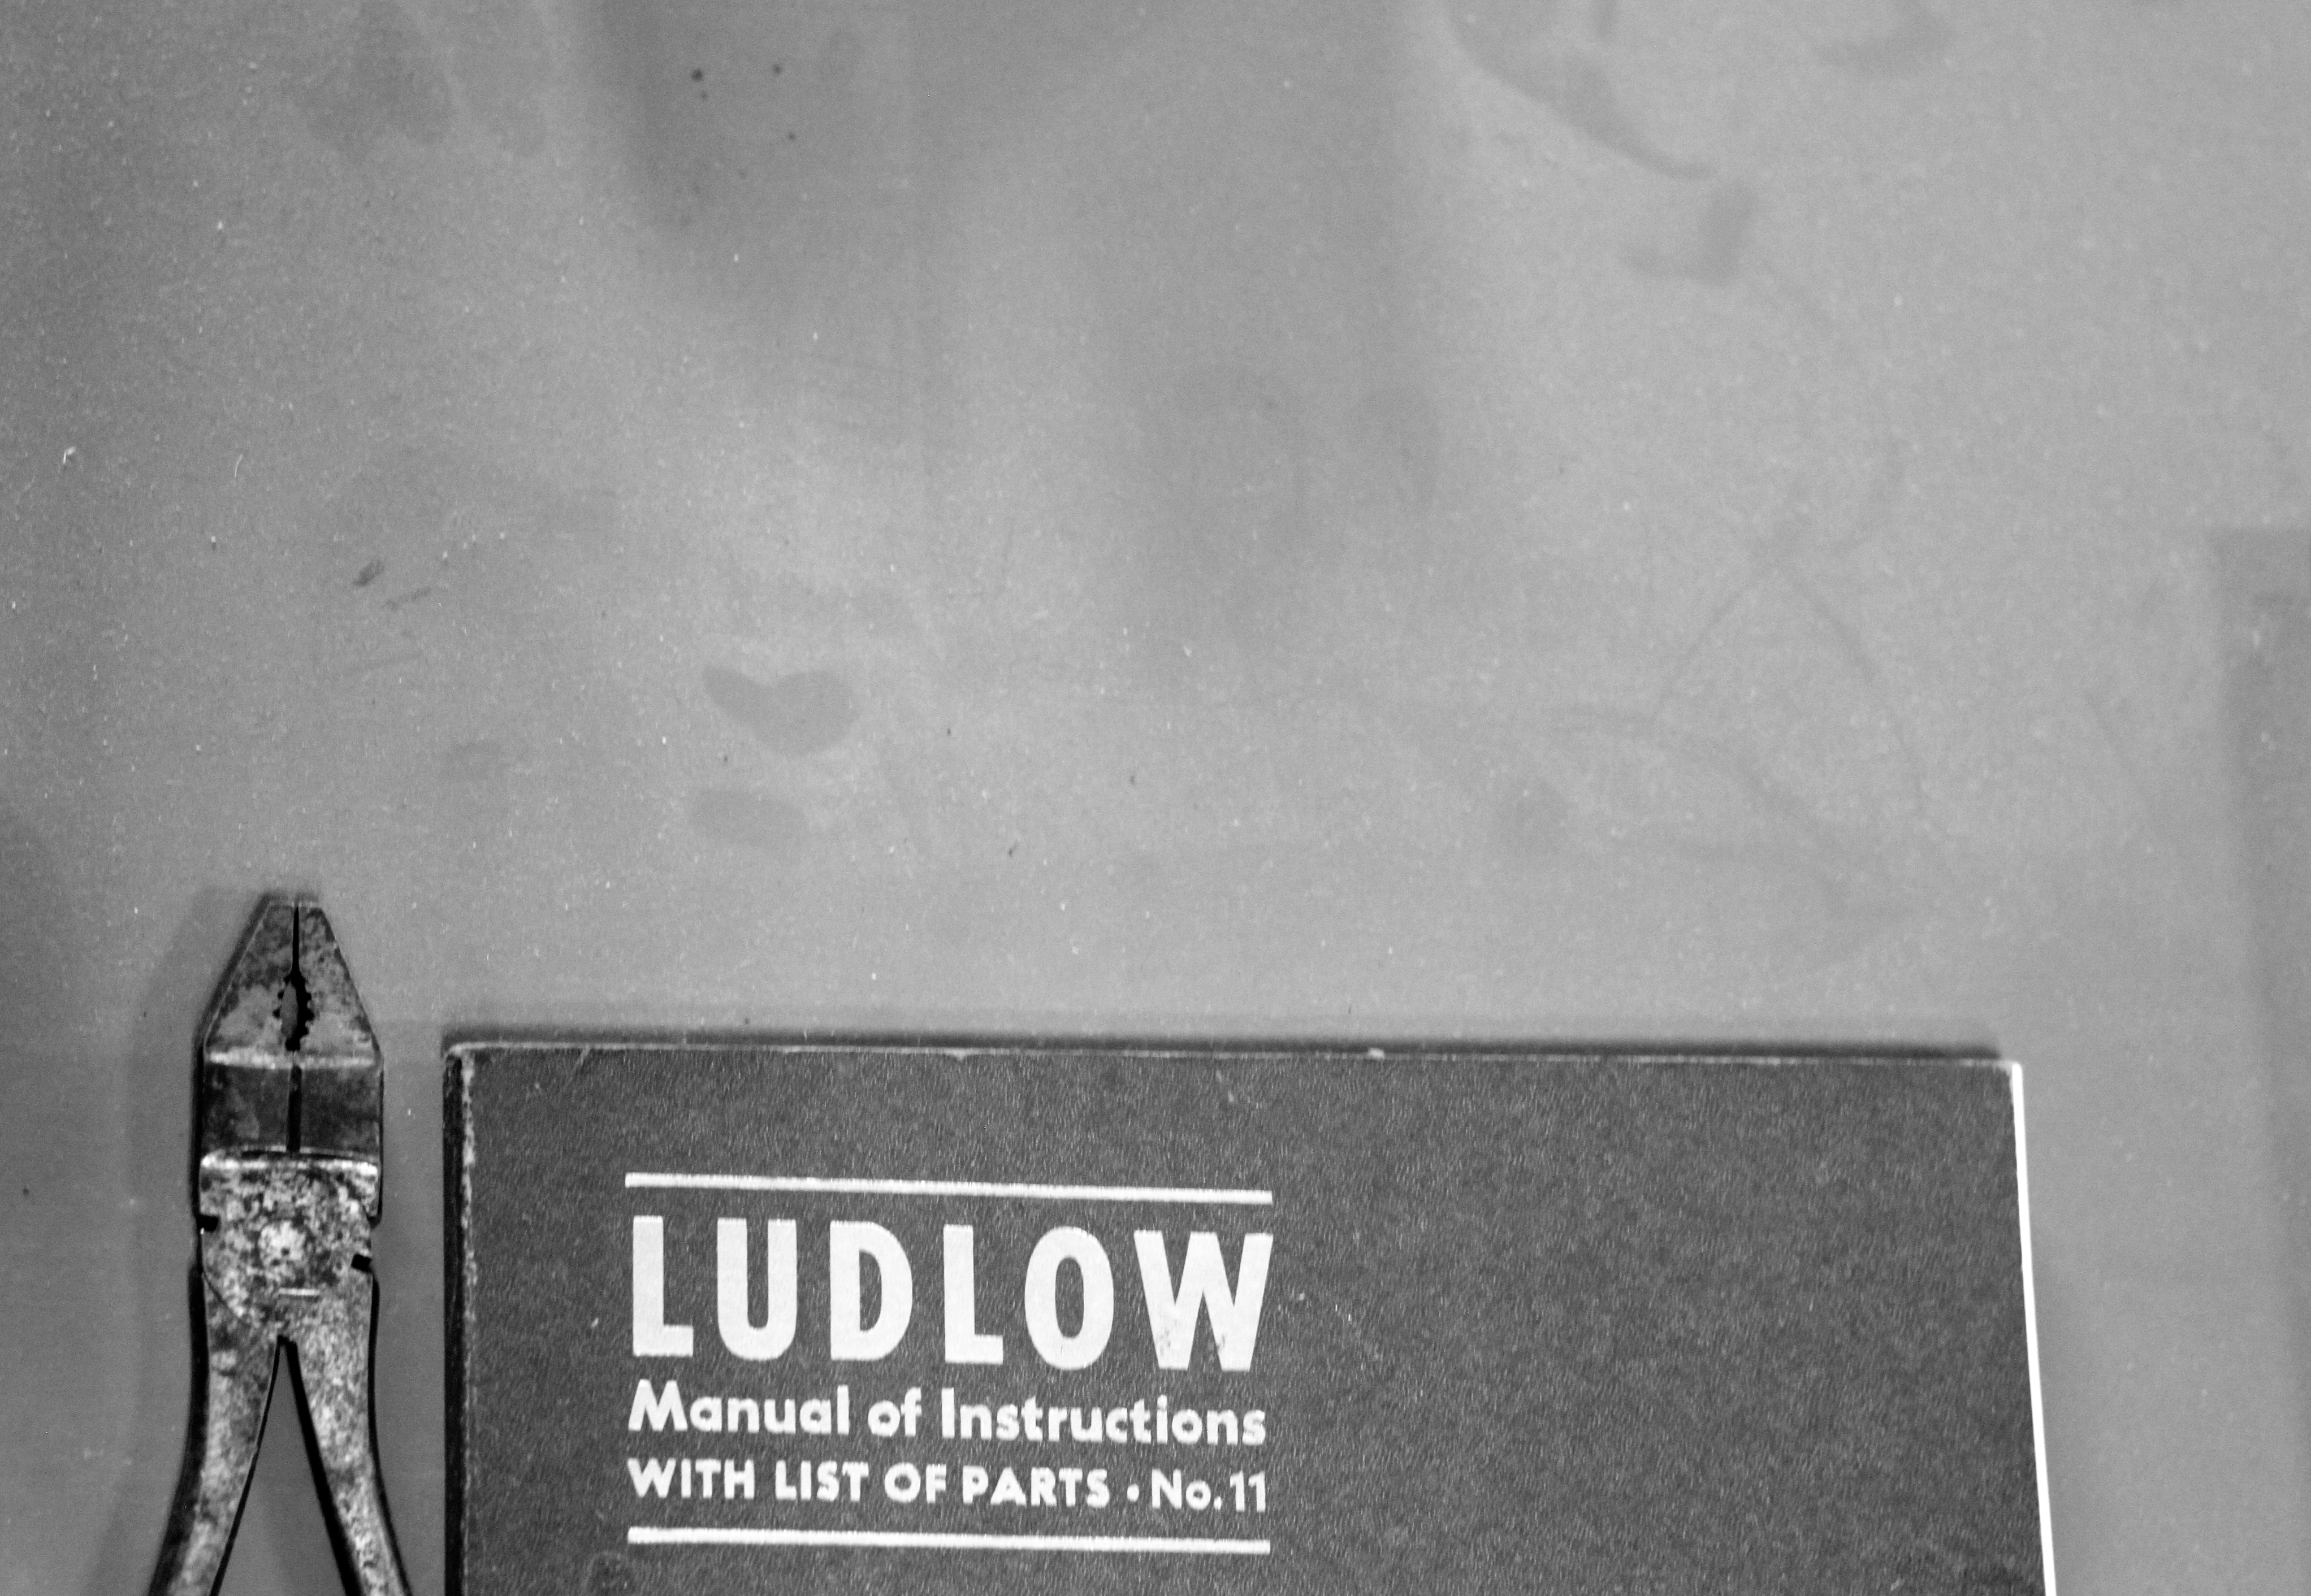 Ludlow Manual of Instructions